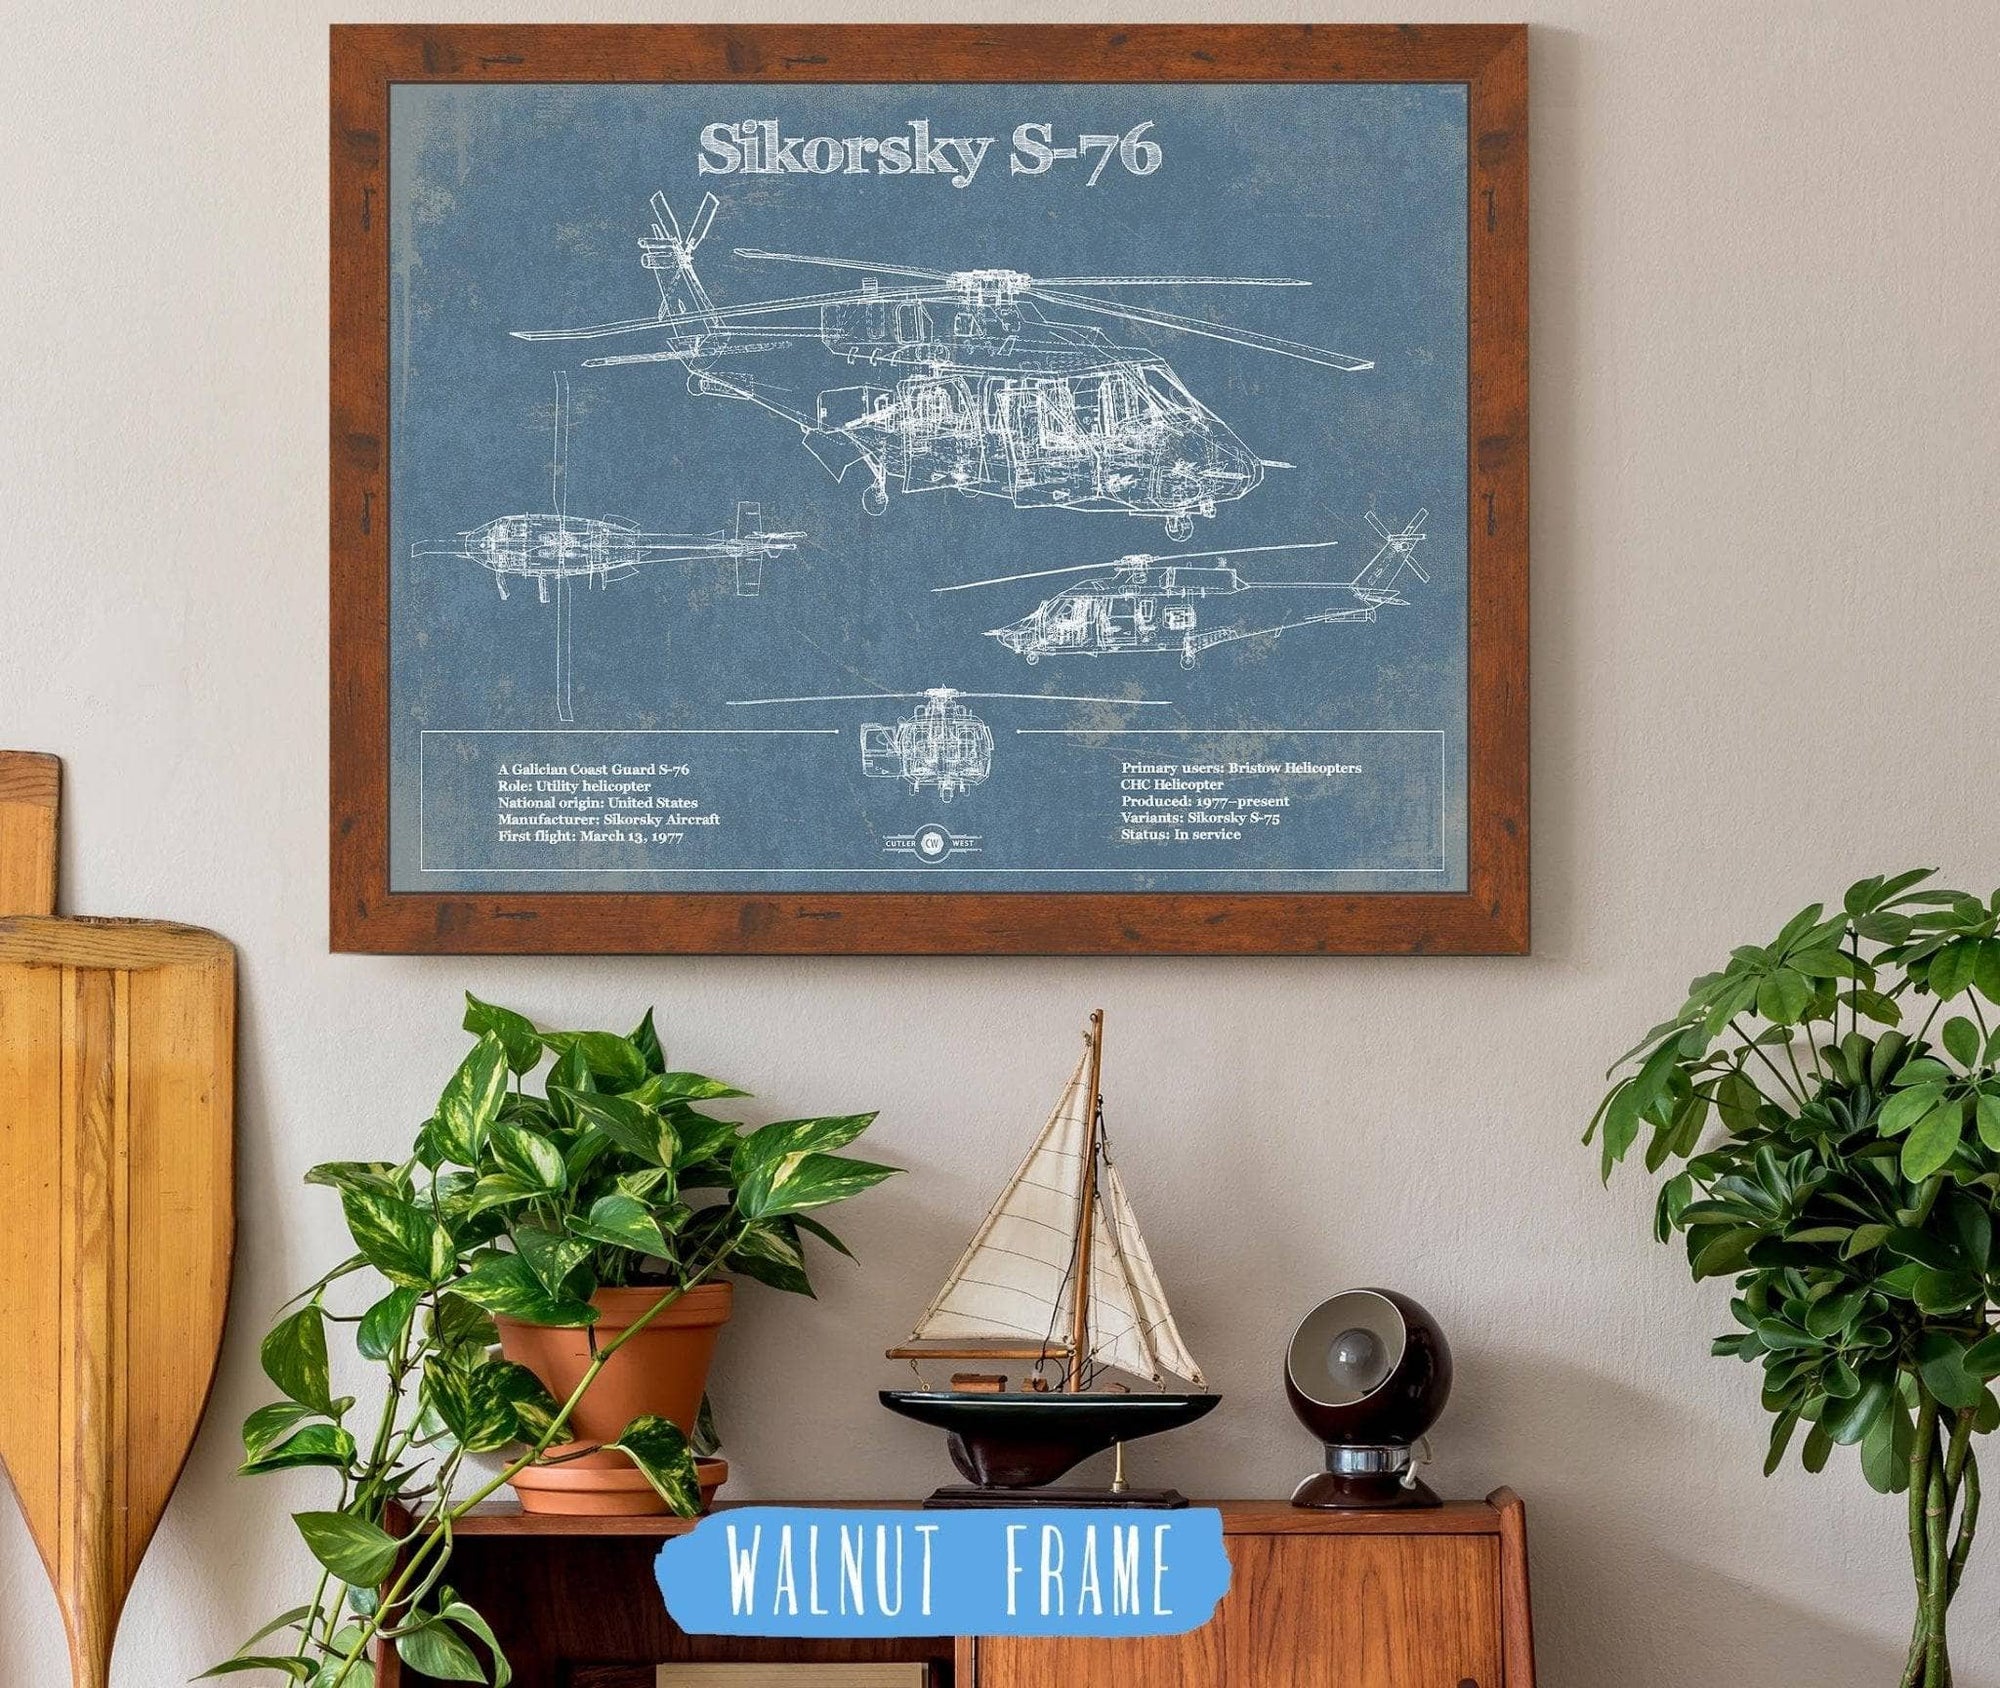 Cutler West Military Aircraft 14" x 11" / Walnut Frame Sikorsky S-76 Helicopter Vintage Aviation Blueprint Military Print 833110137_9700